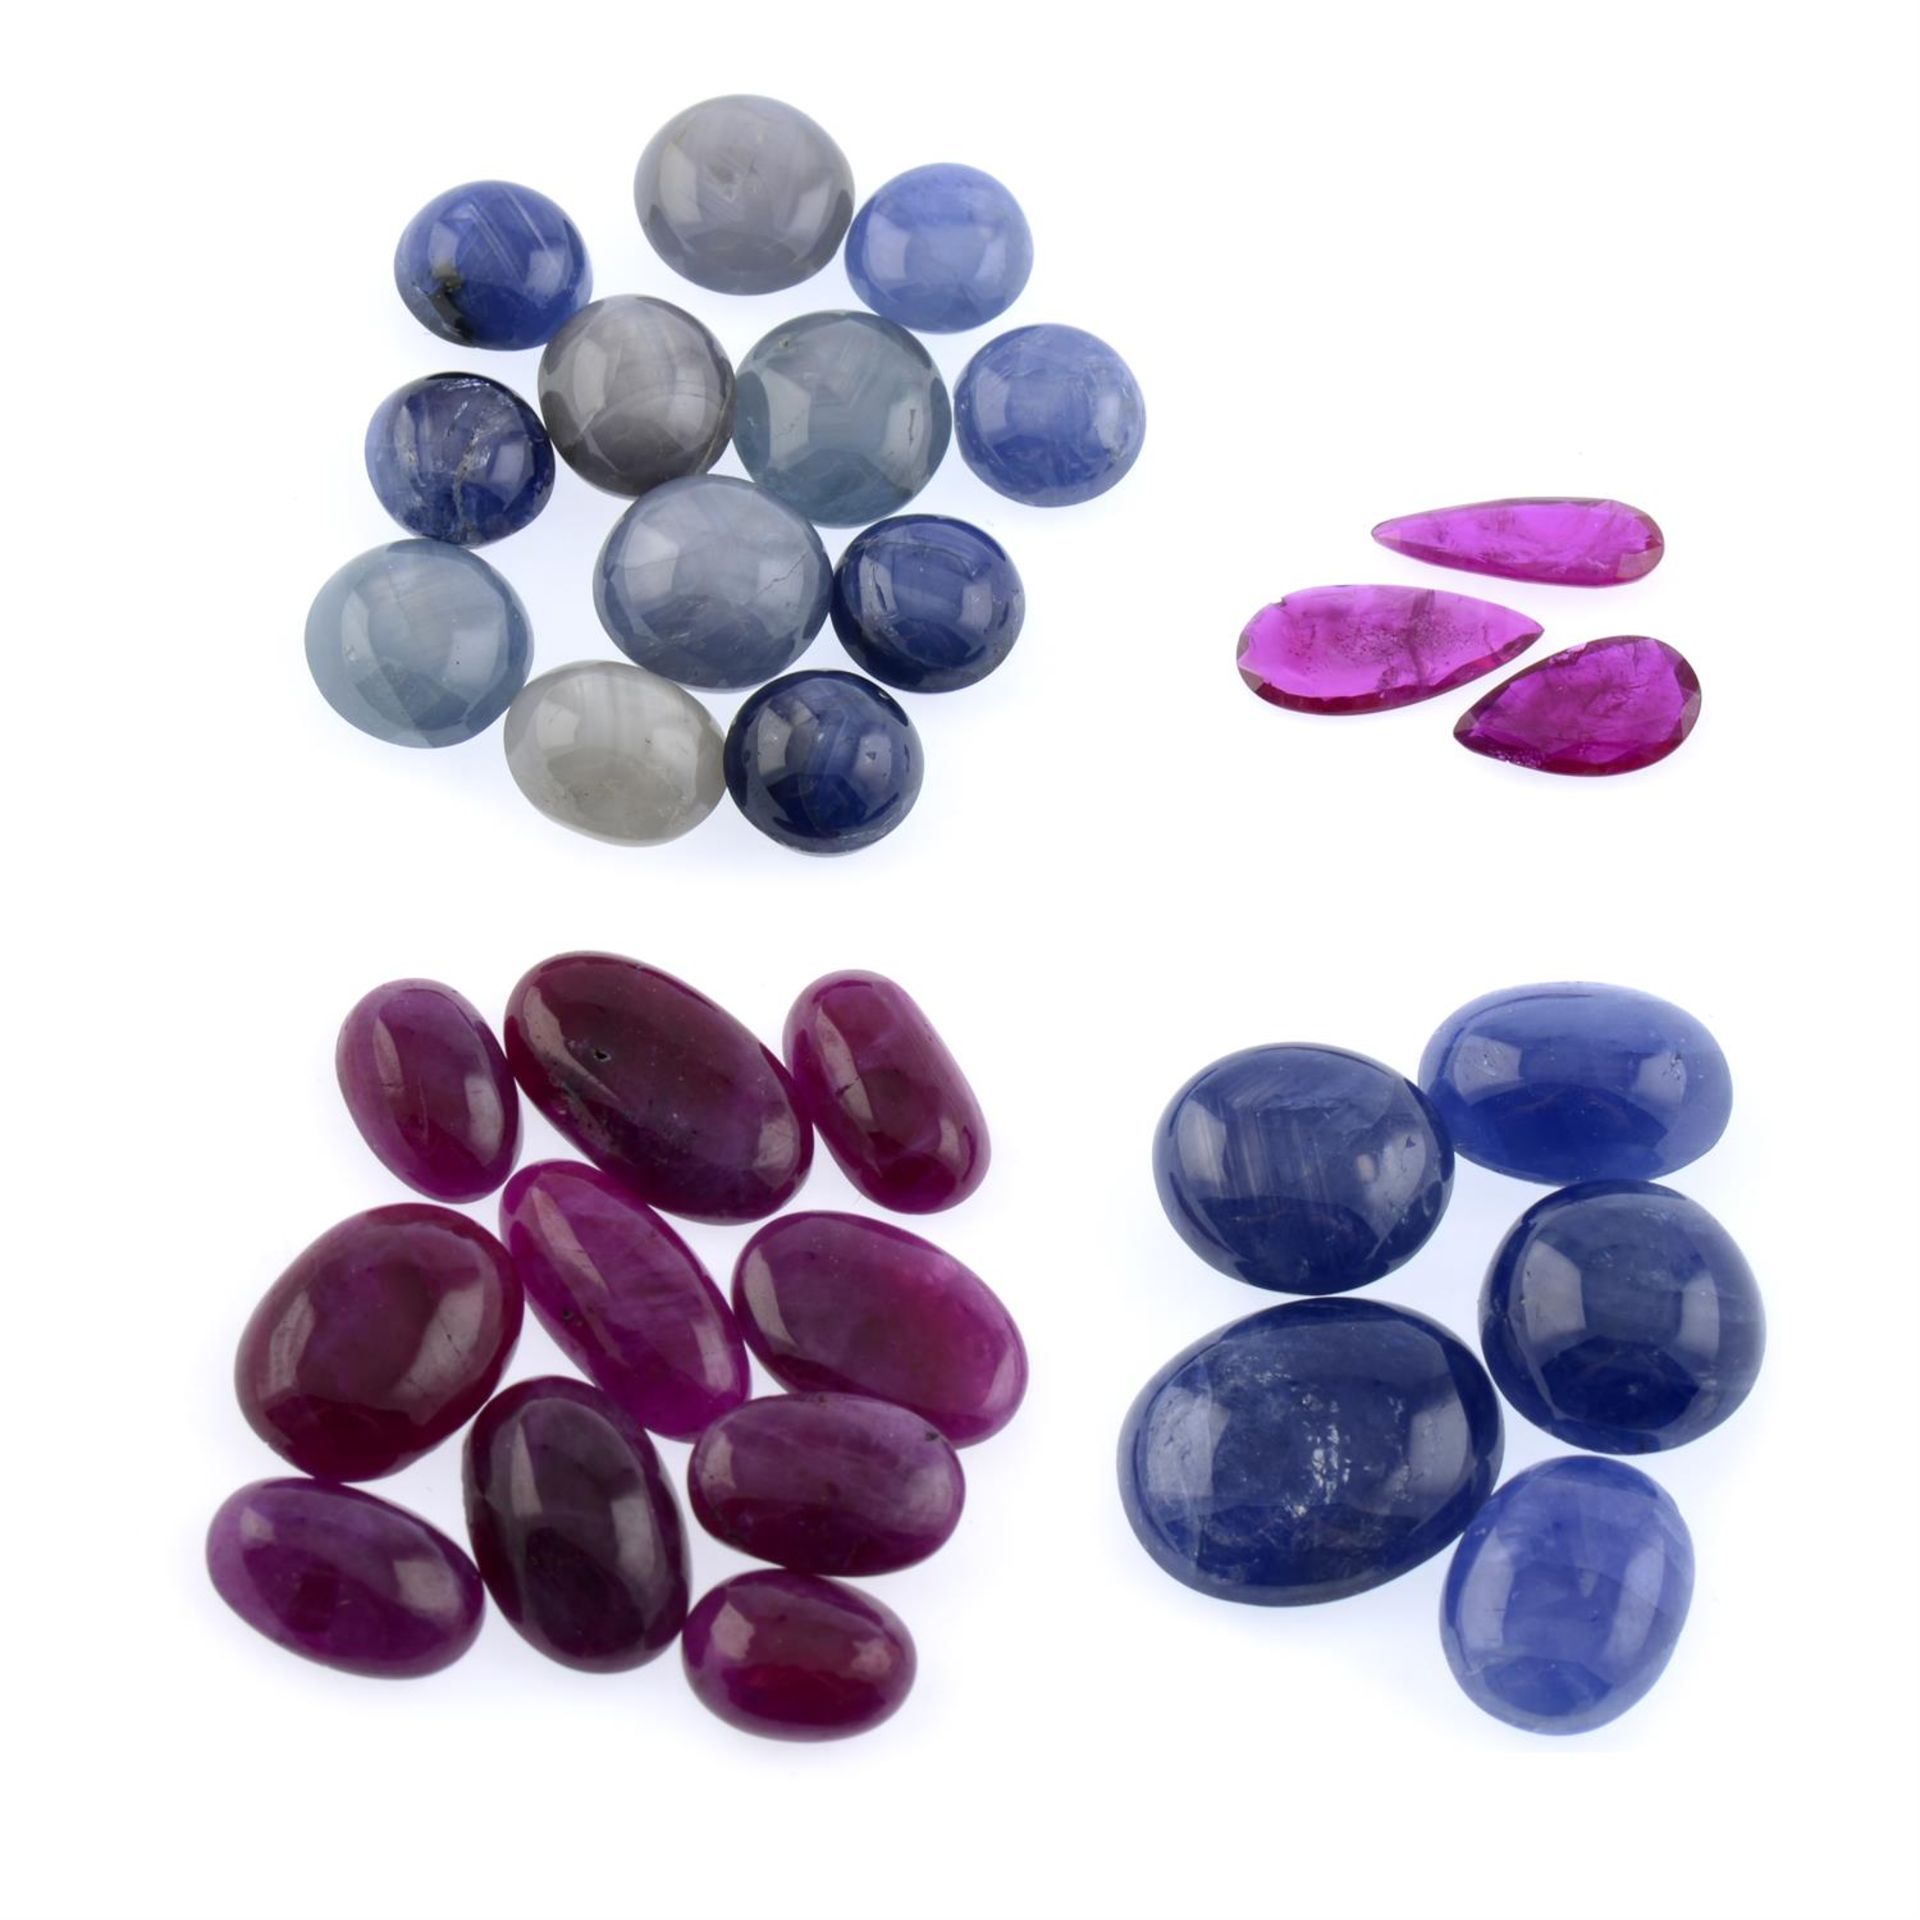 Assorted rubies and sapphires, 130.29ct